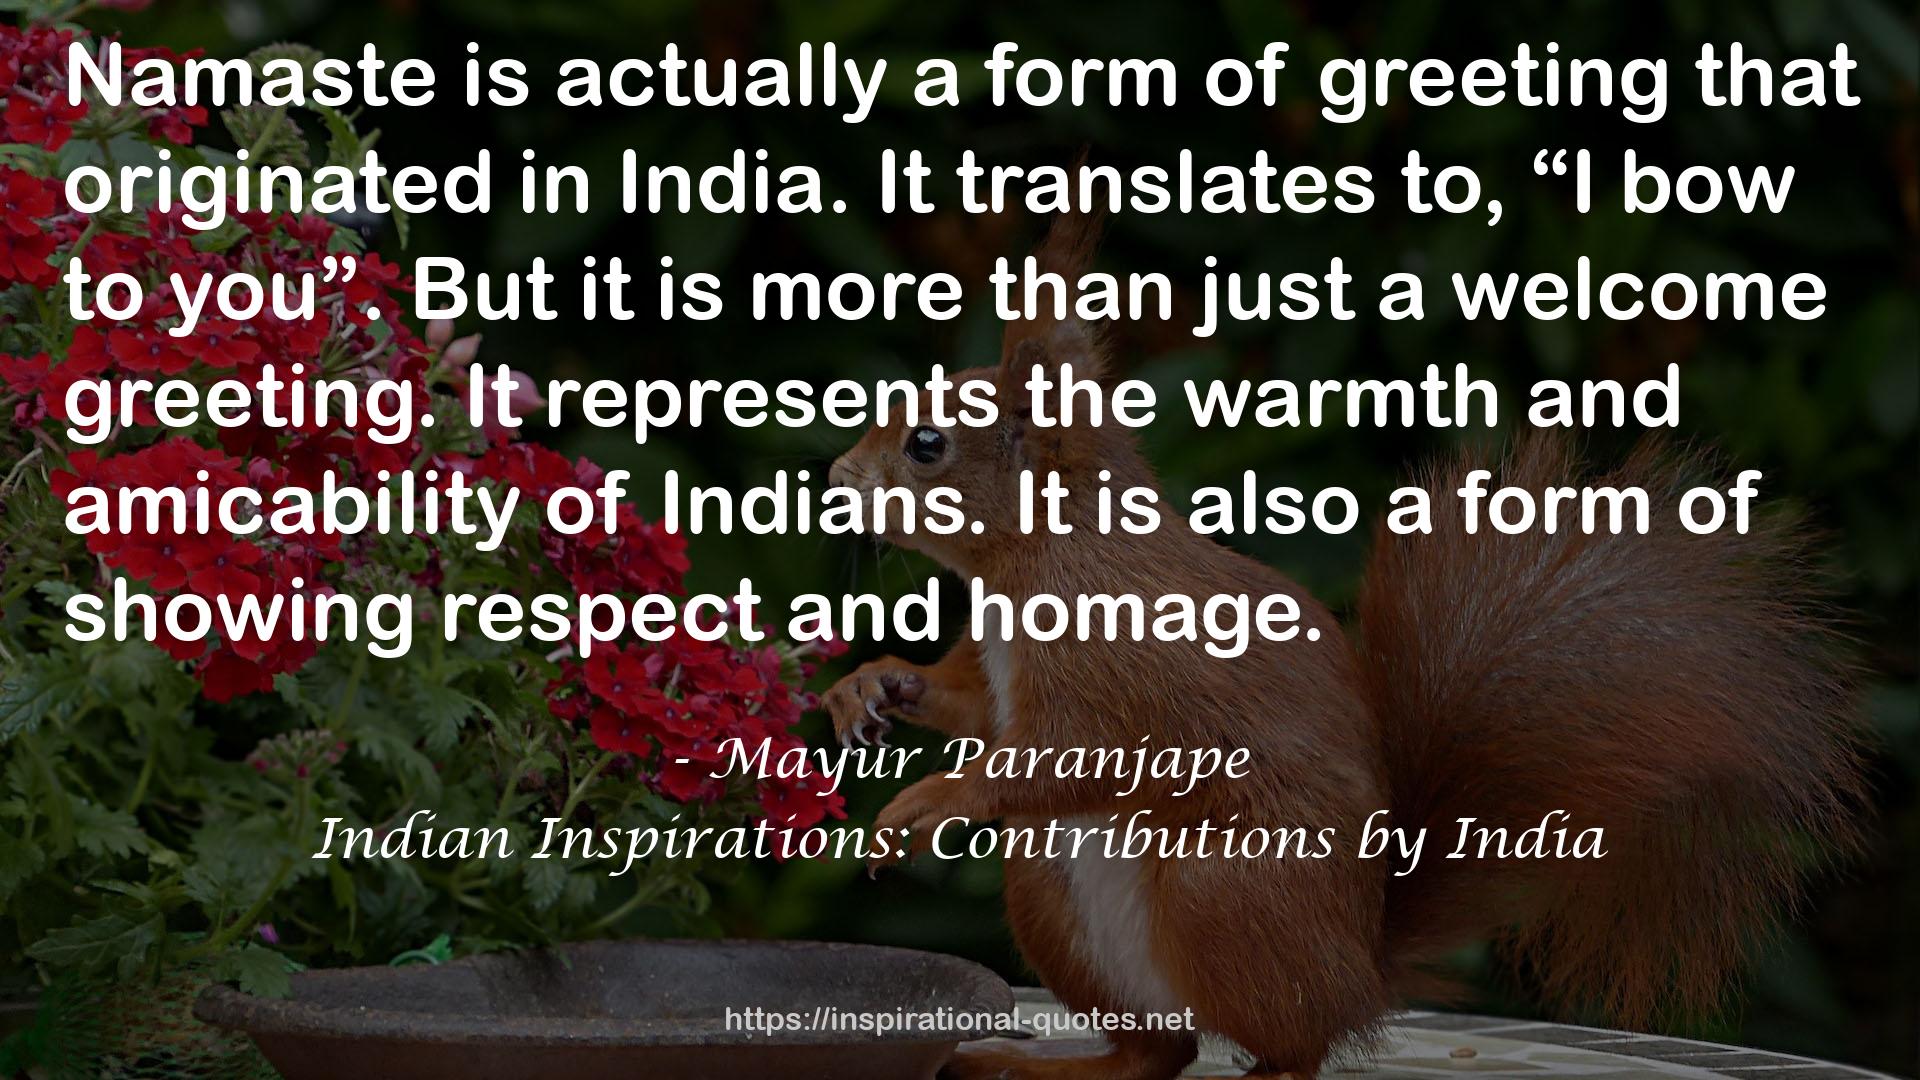 Indian Inspirations: Contributions by India QUOTES